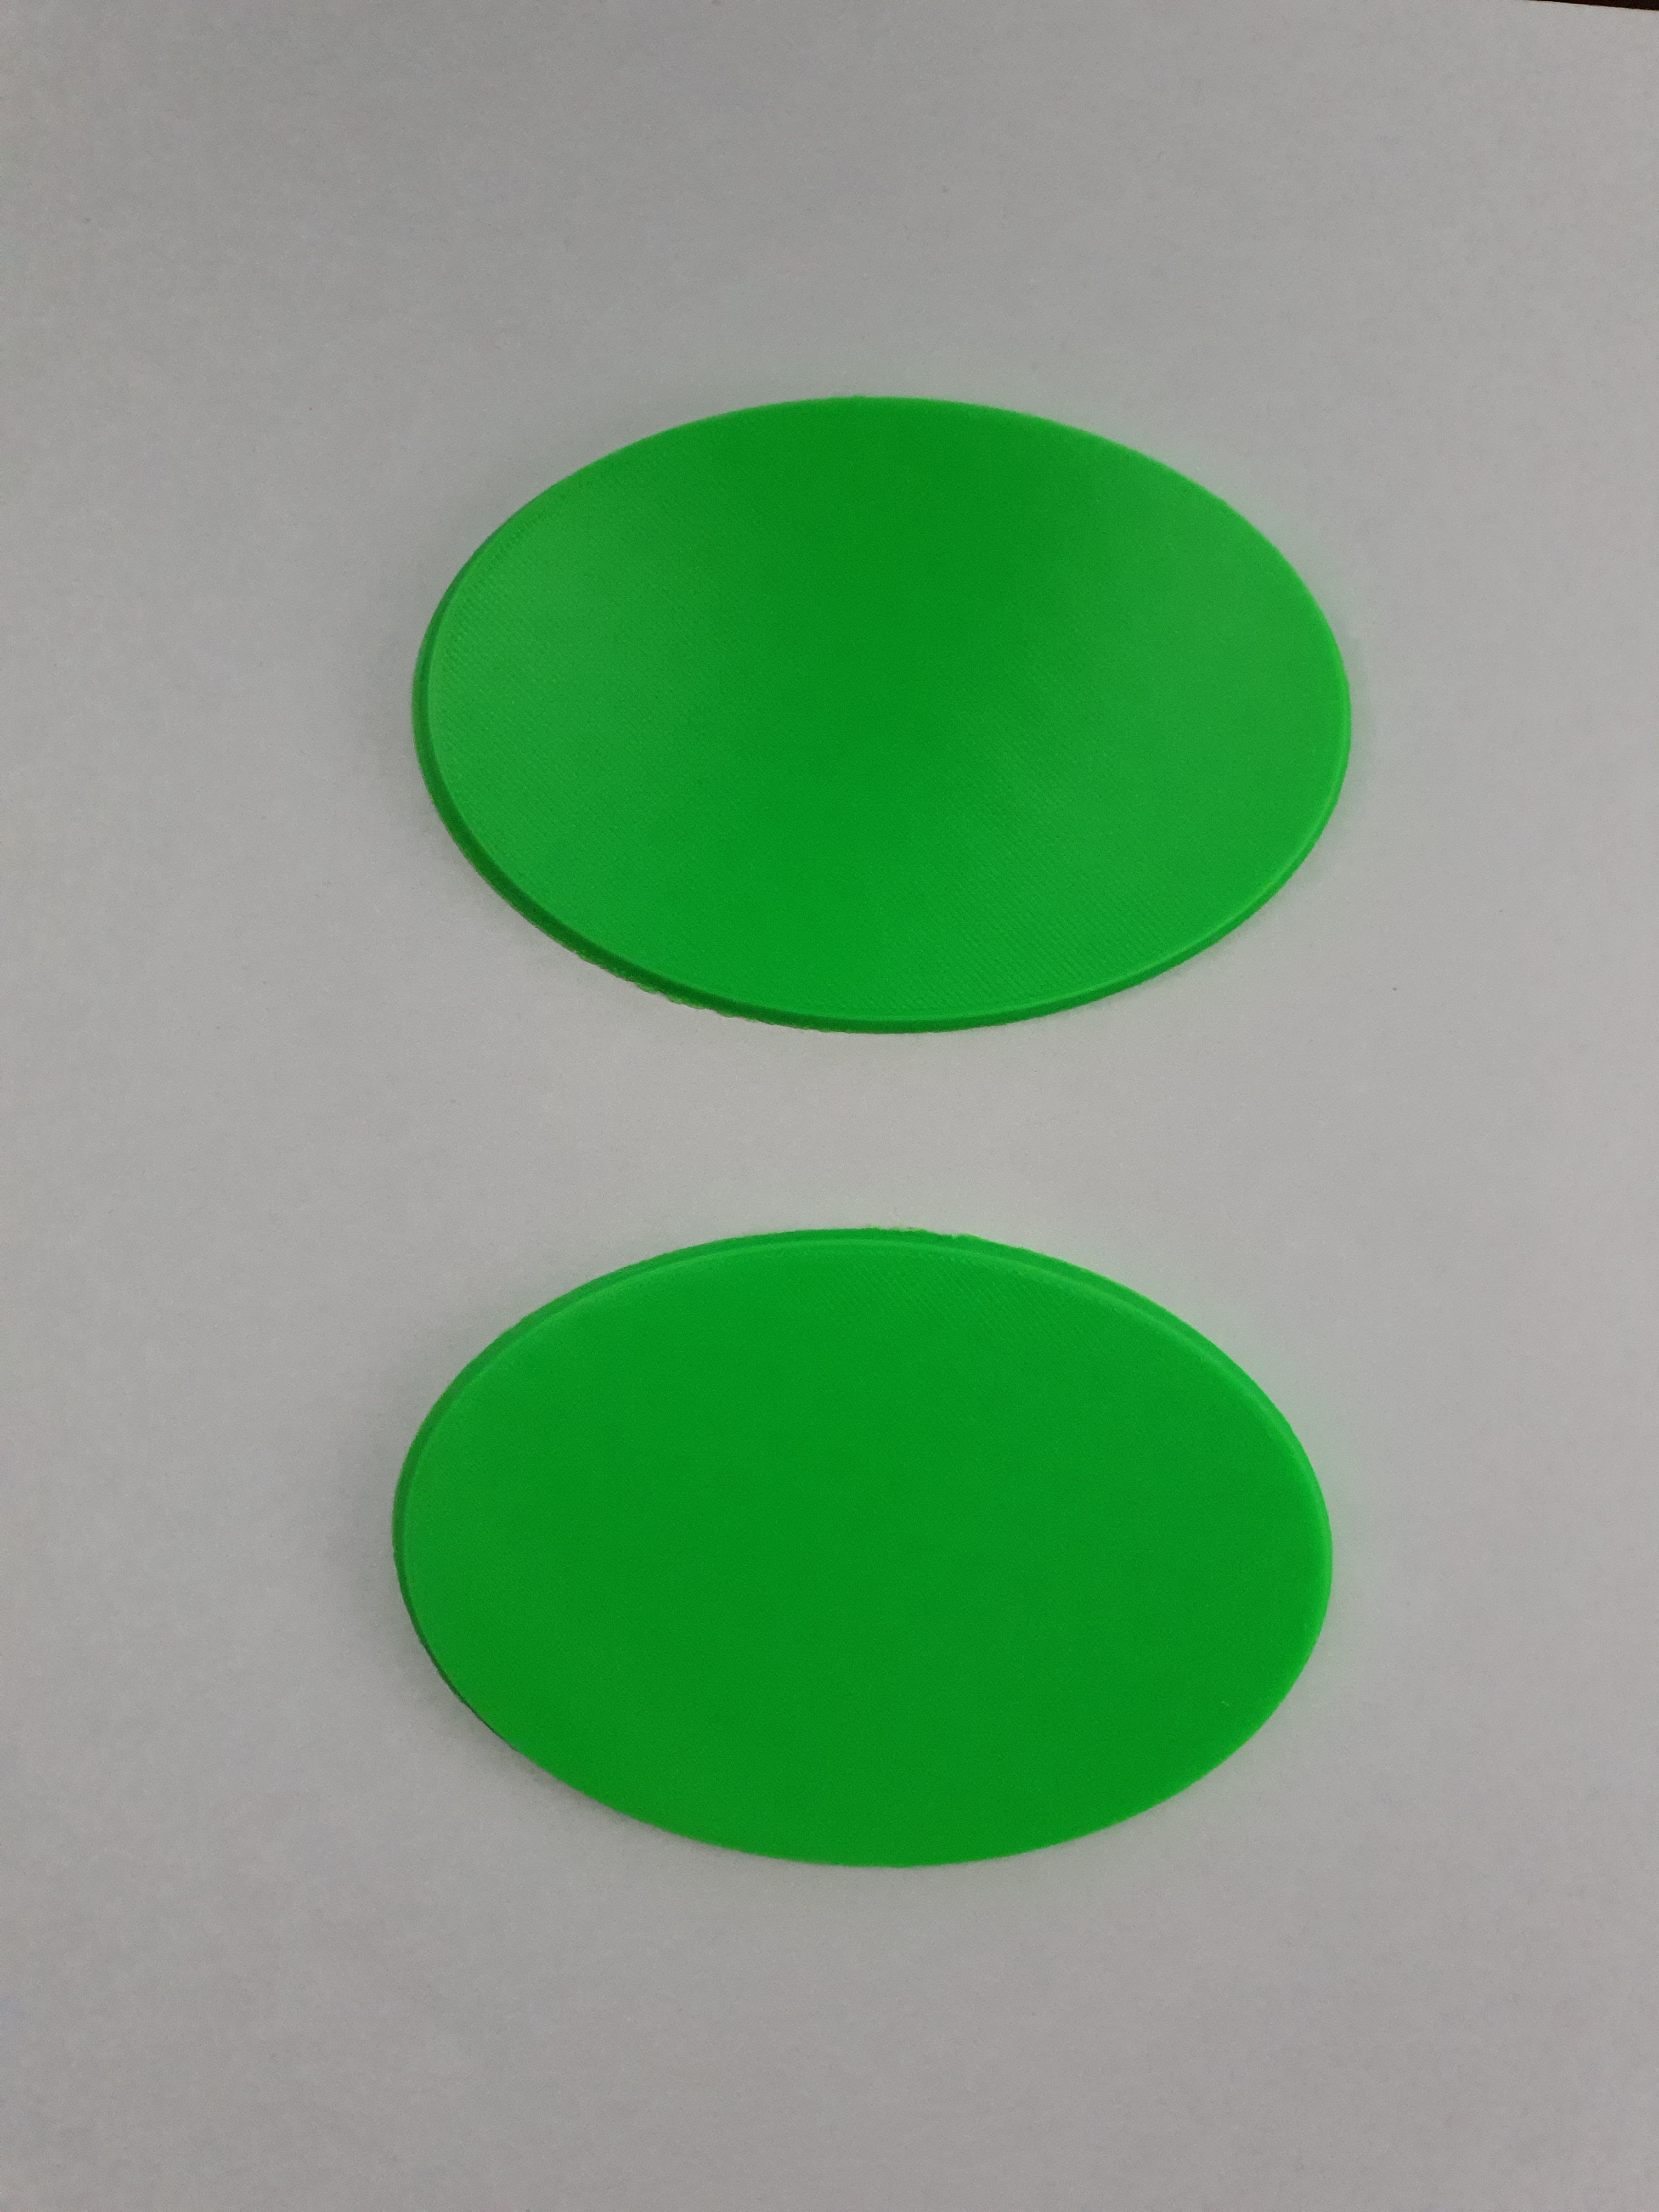 A Pack of 2x 105mm x 70mm Oval Bases | Cracking-Singles